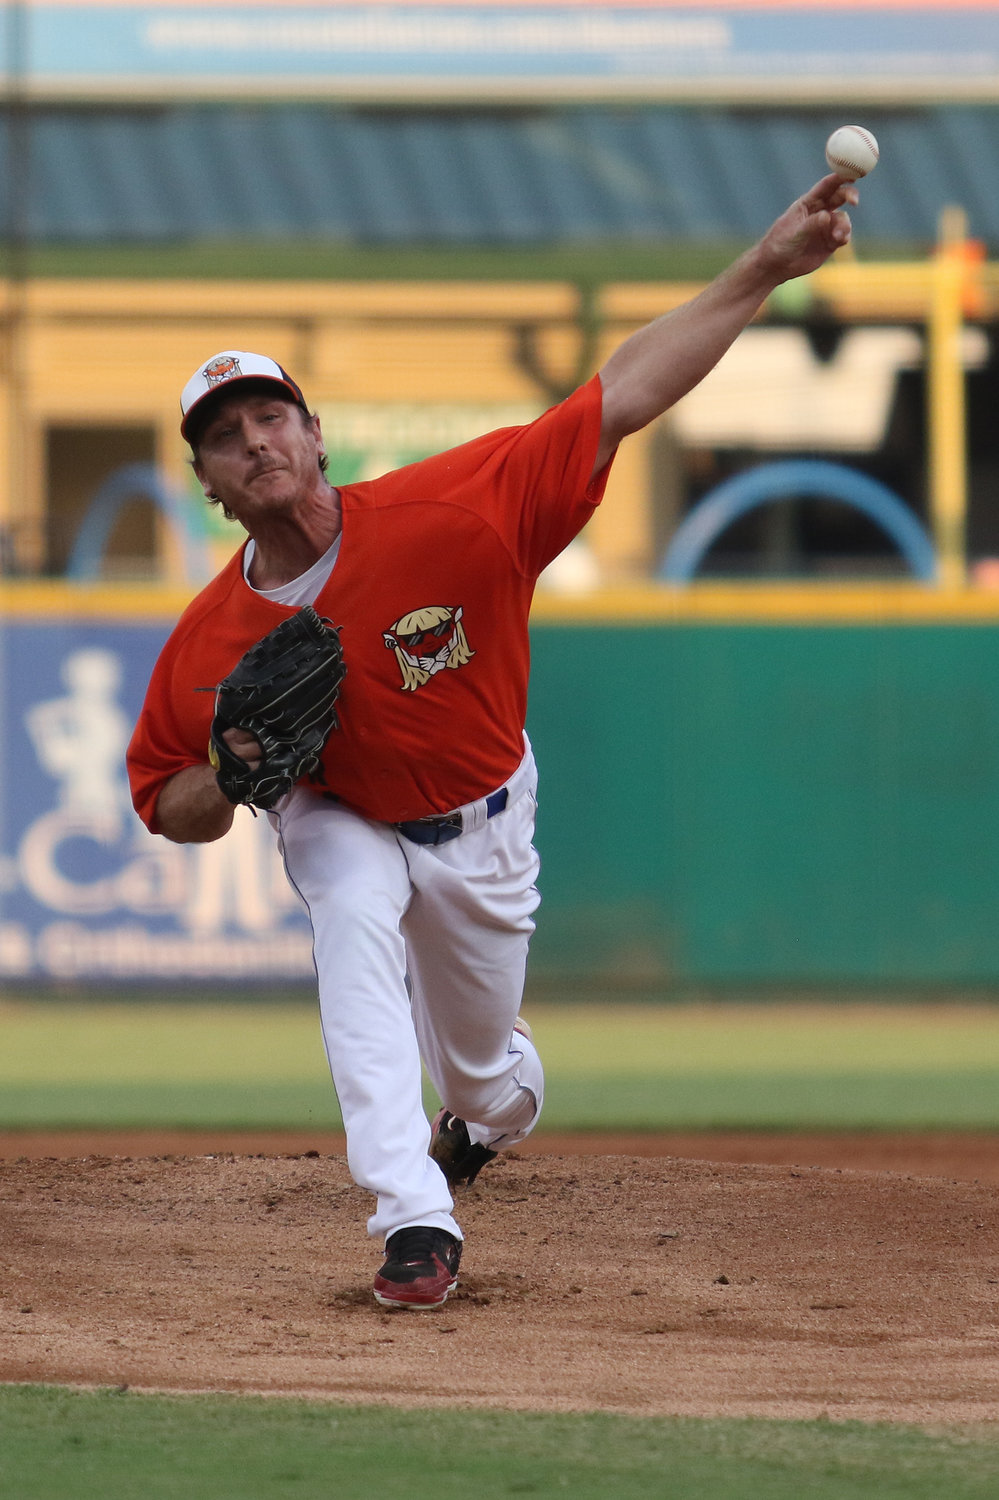 Eastern Reyes del Tigre pitcher Scott Kazmir makes his return to Constellation Field eight years after pitching for the Sugar Land Skeeters in their inaugural season. Kazmir, 36, who is a former Major League All-Star, is making a comeback in the Constellation Energy League.